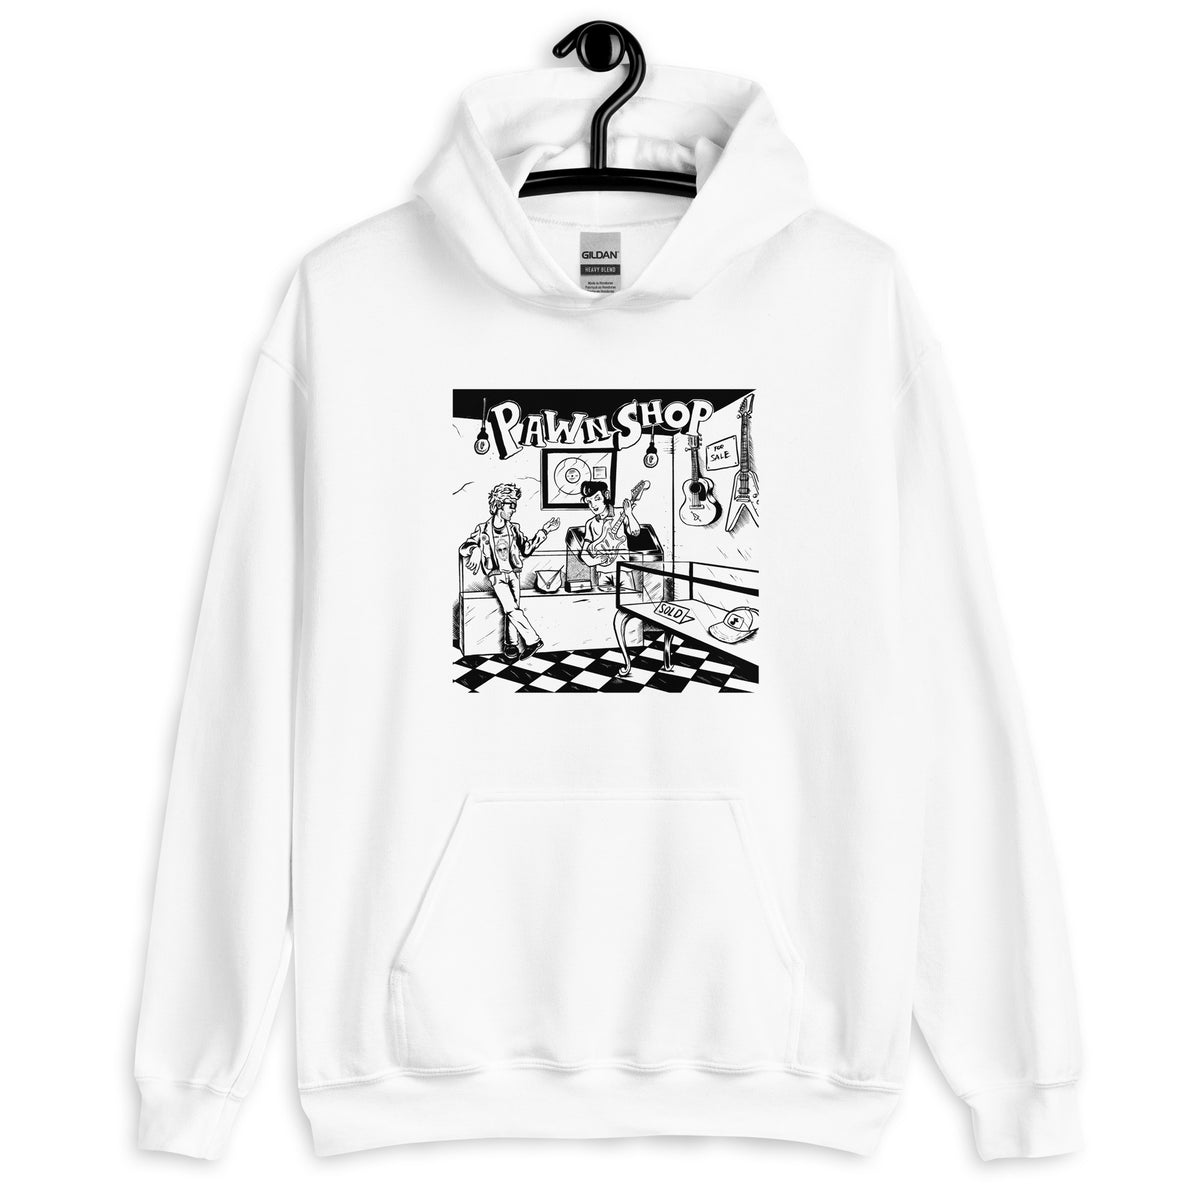 Sweaters and Hoodies – Born Losers Merch and more